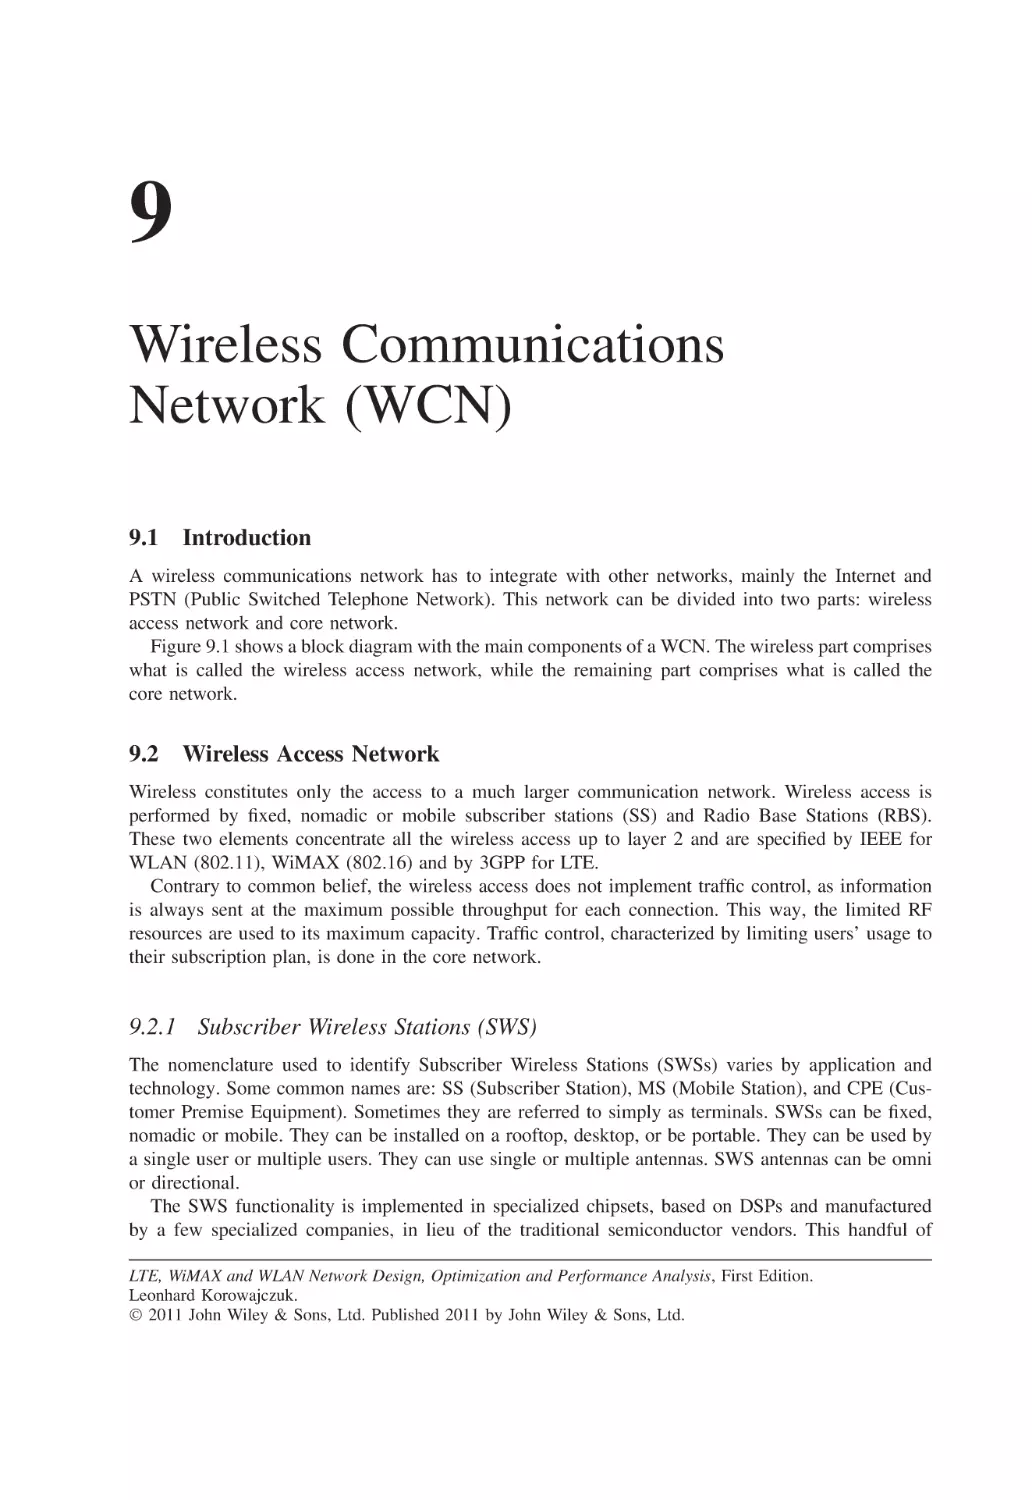 9 Wireless Communications Network (WCN)
9.1 Introduction
9.2 Wireless Access Network
9.2.1 Subscriber Wireless Stations (SWS)